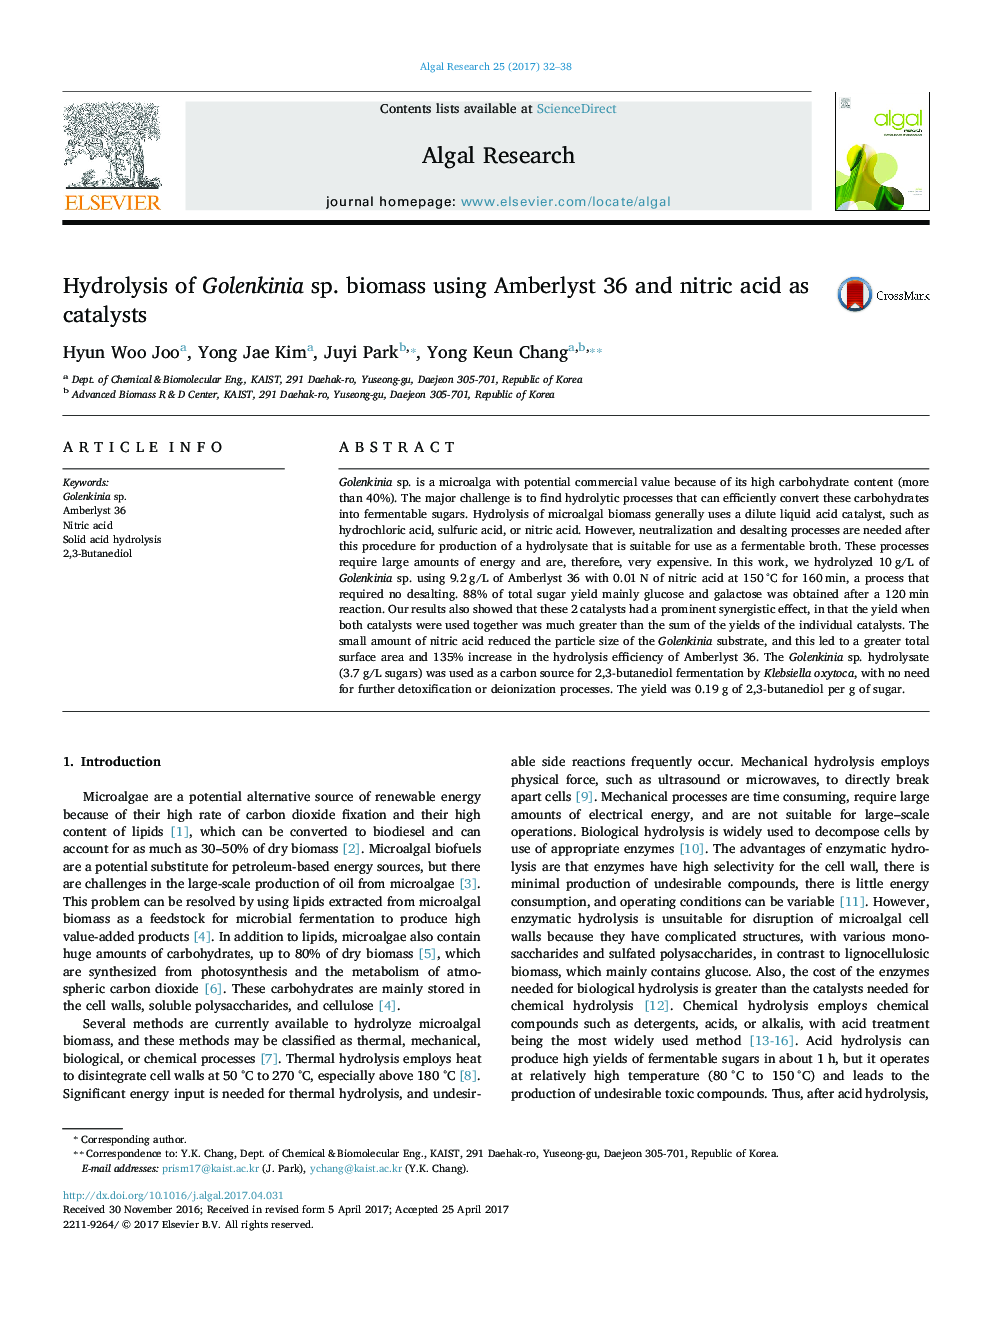 Hydrolysis of Golenkinia sp. biomass using Amberlyst 36 and nitric acid as catalysts